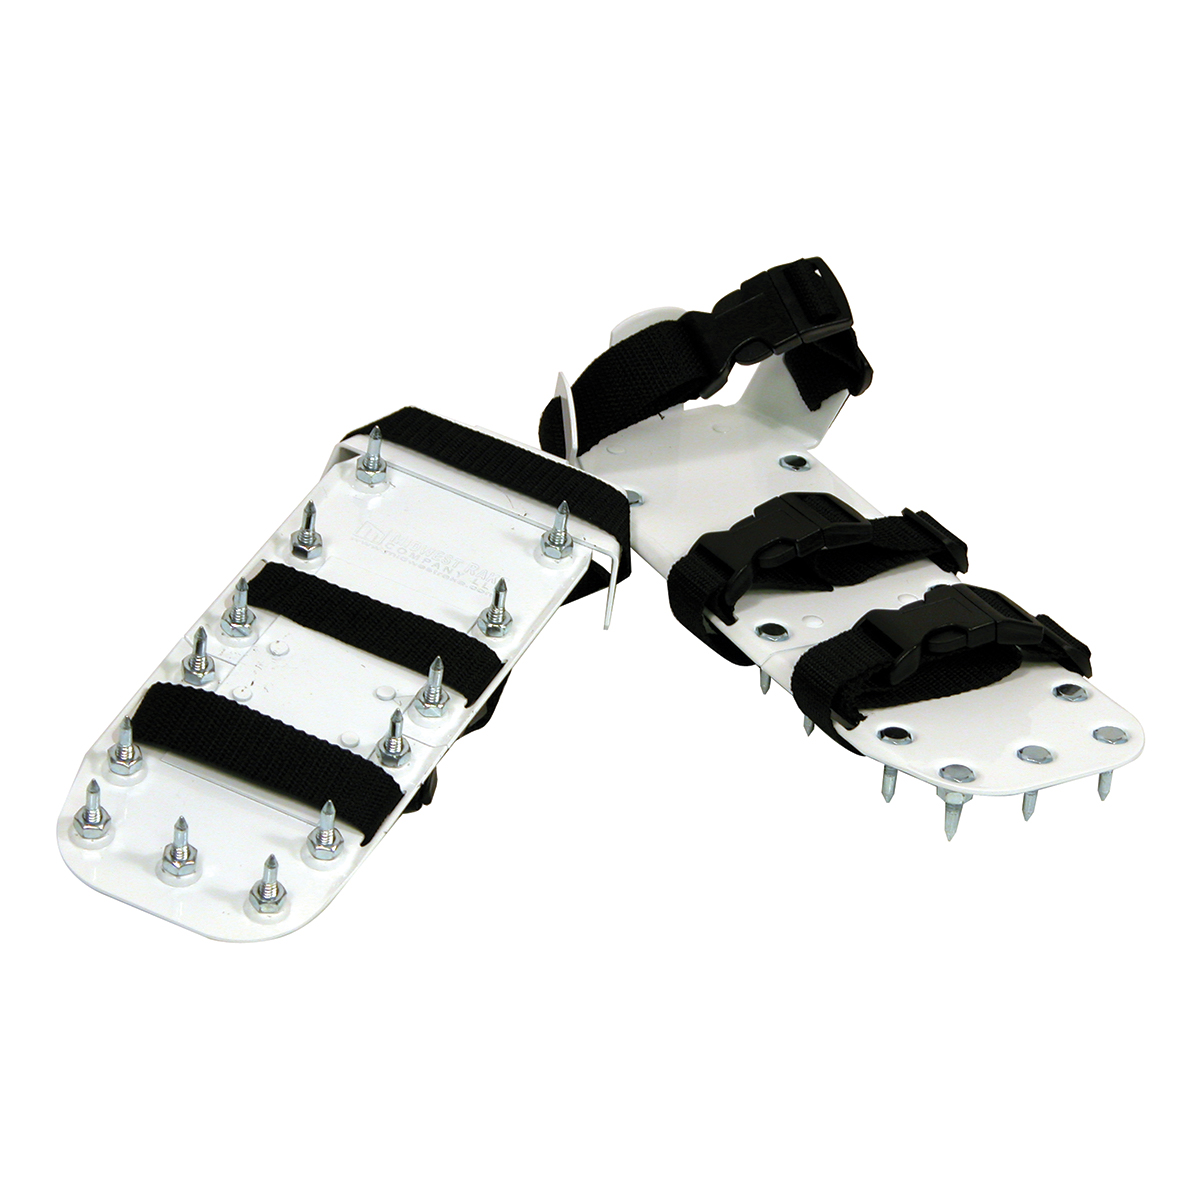 Spiked Shoes - Durable Polypropylene, Steel Spikes Included